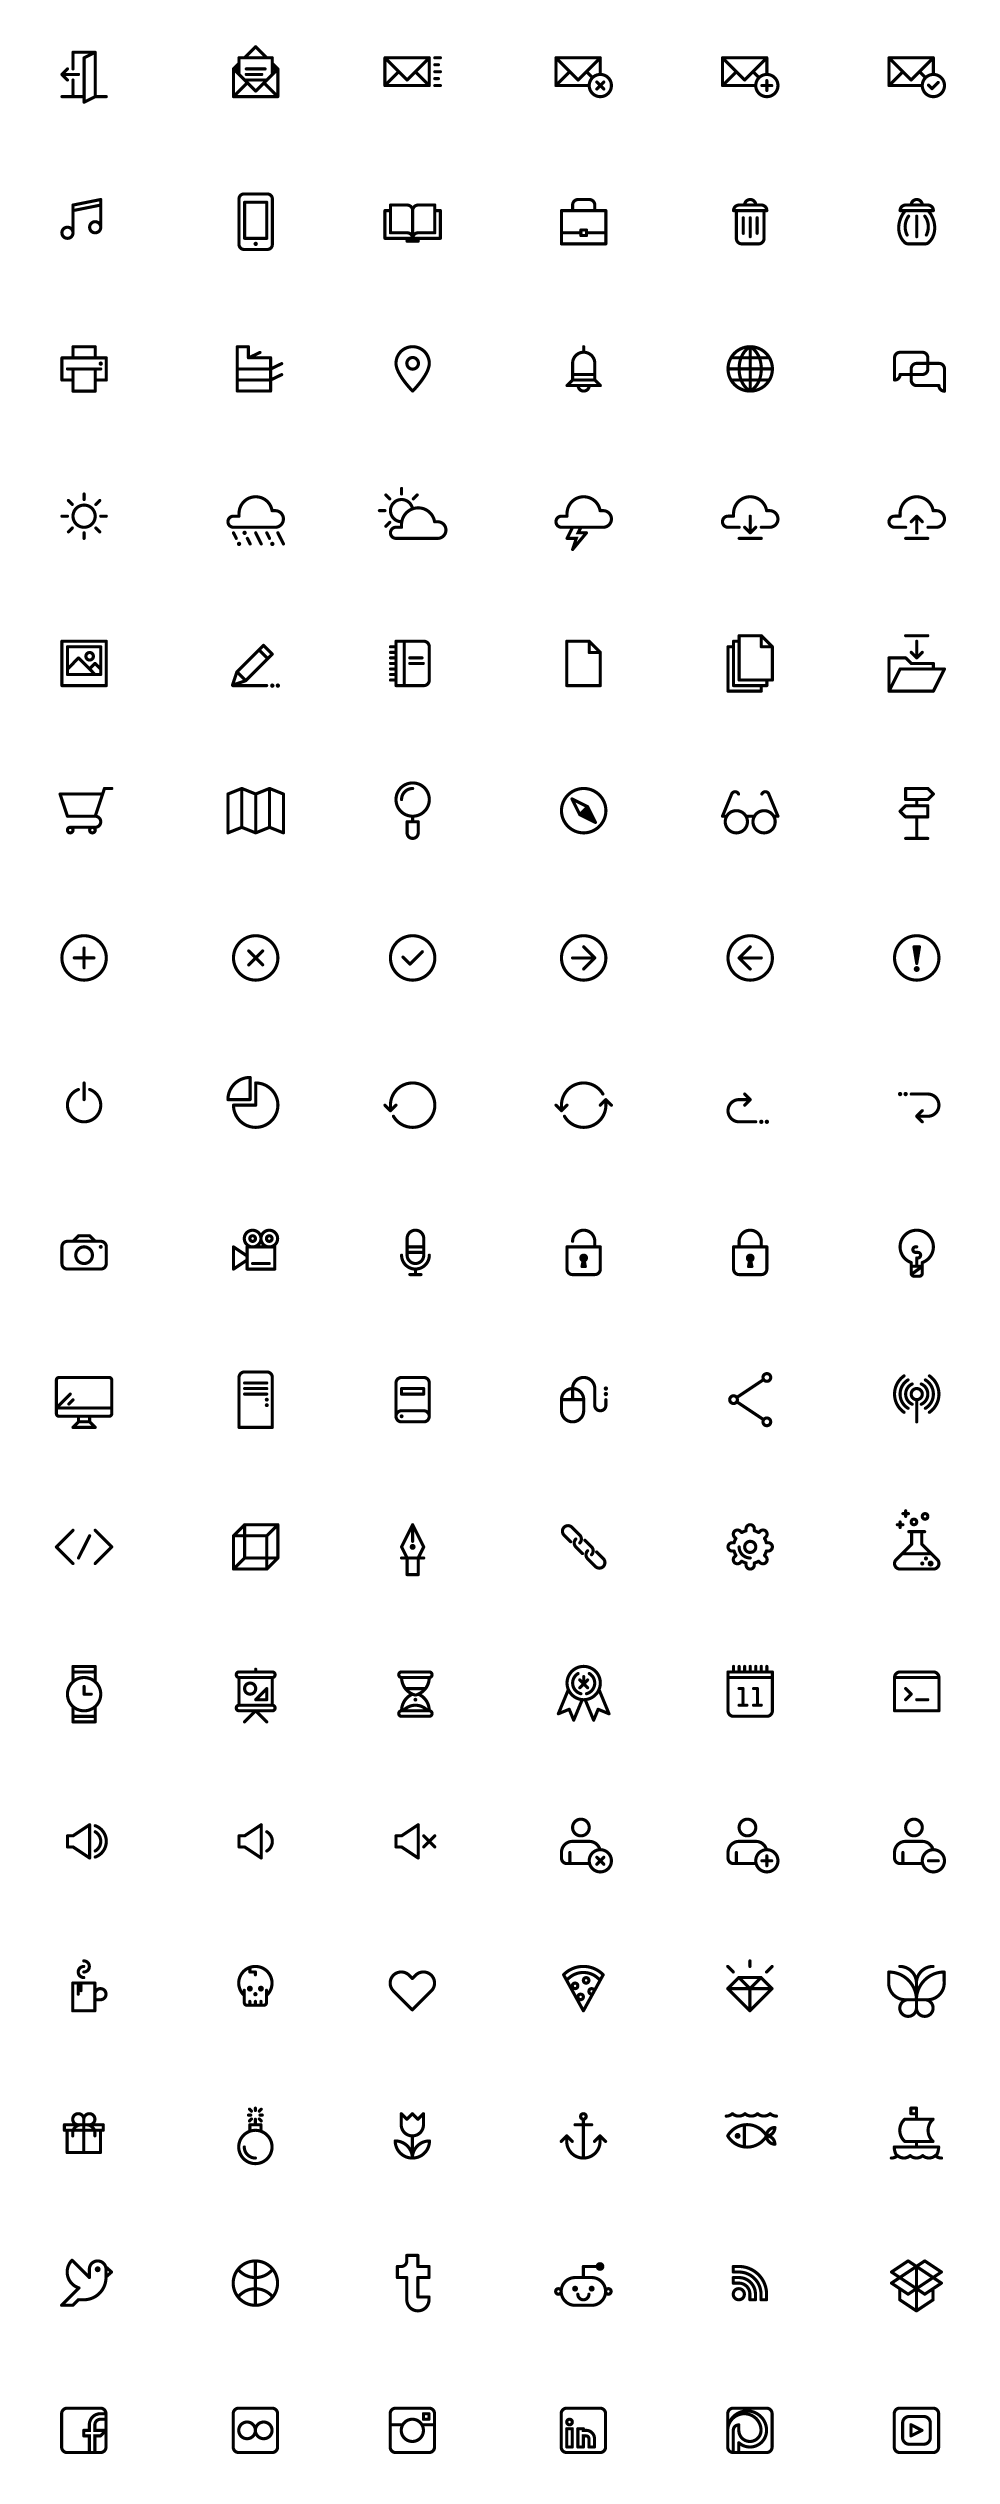 icons download free EPS svg ai